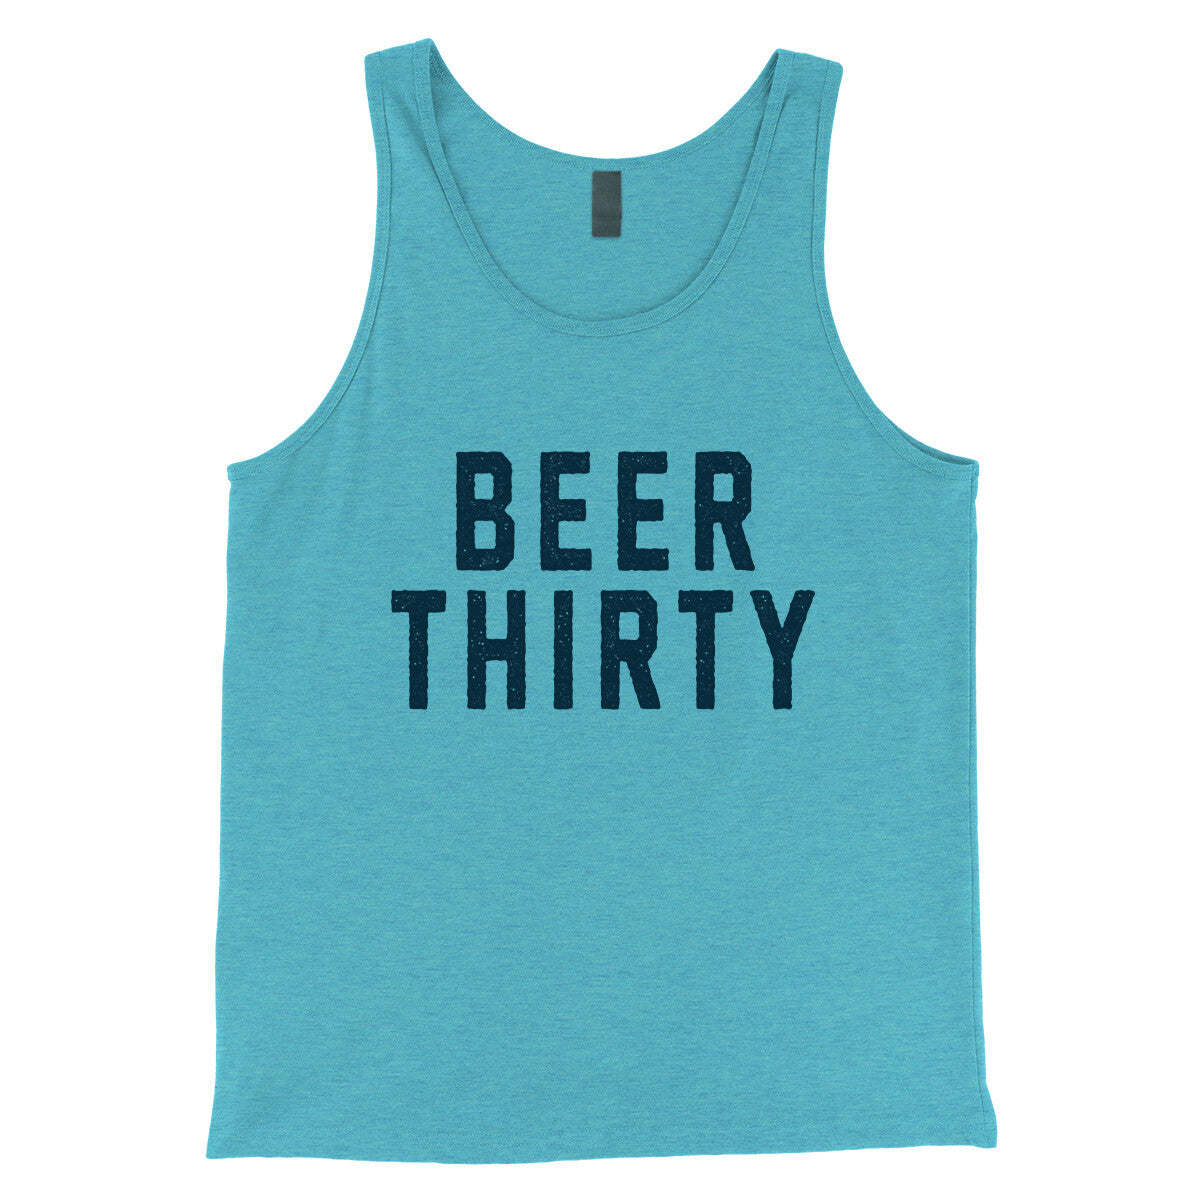 Beer Thirty in Aqua Triblend Color